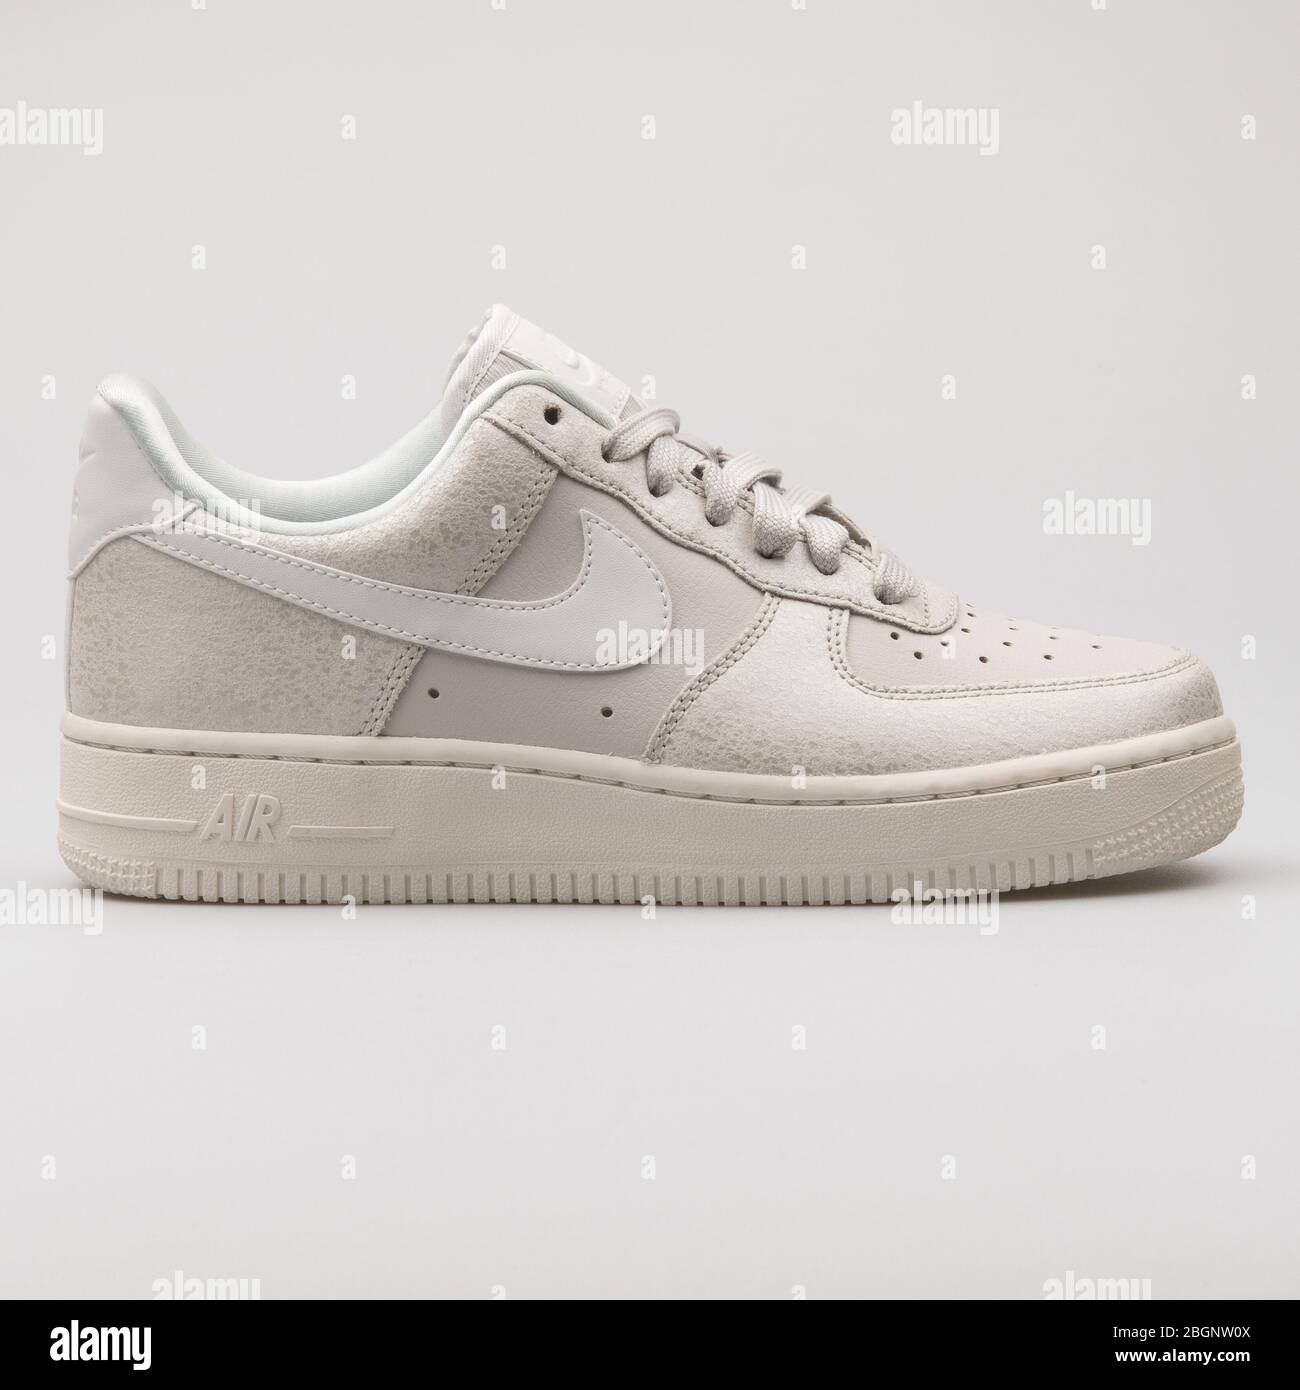 VIENNA, AUSTRIA - AUGUST 29, 2017: Nike Air Force 1 beige sneaker on white  background Stock Photo - Alamy